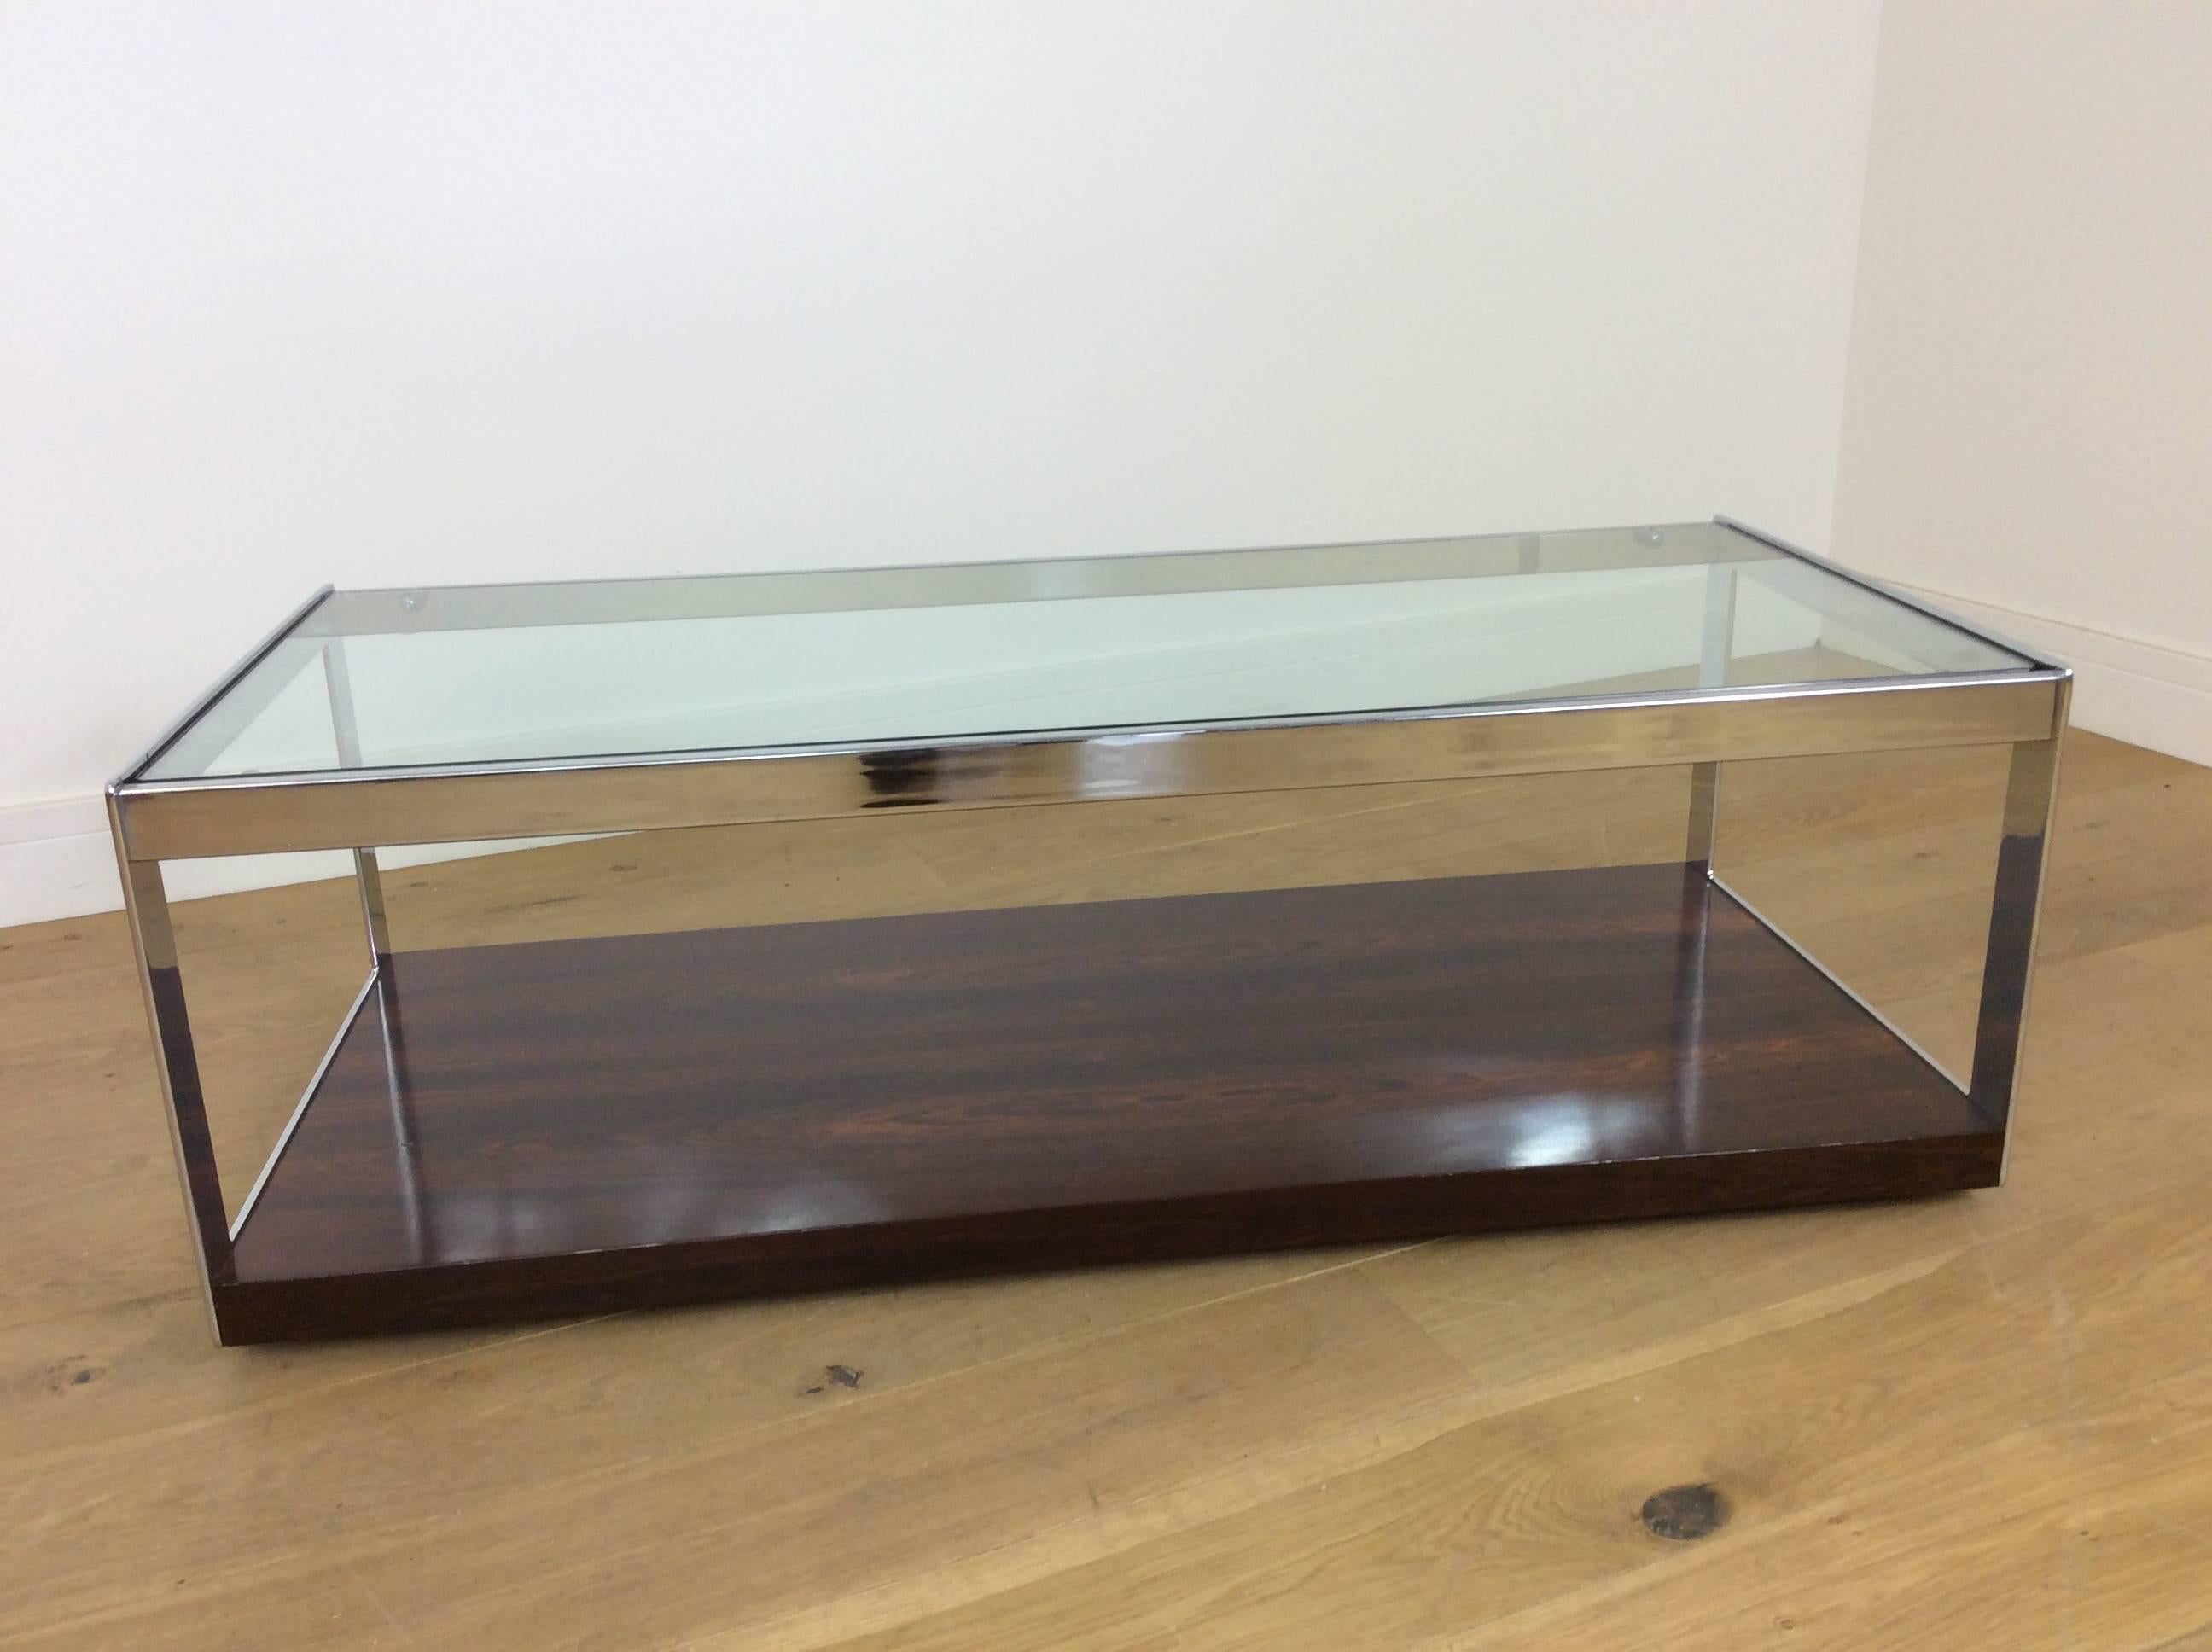 Beautiful rosewood and glass long coffee table on castors.
Fine high quality flat chrome frame, heavy plate glass top and beautiful rosewood base.
Classic midcentury Furniture. Designed by Richard Young for Merrow Associates.
Measures: 40 cm H,